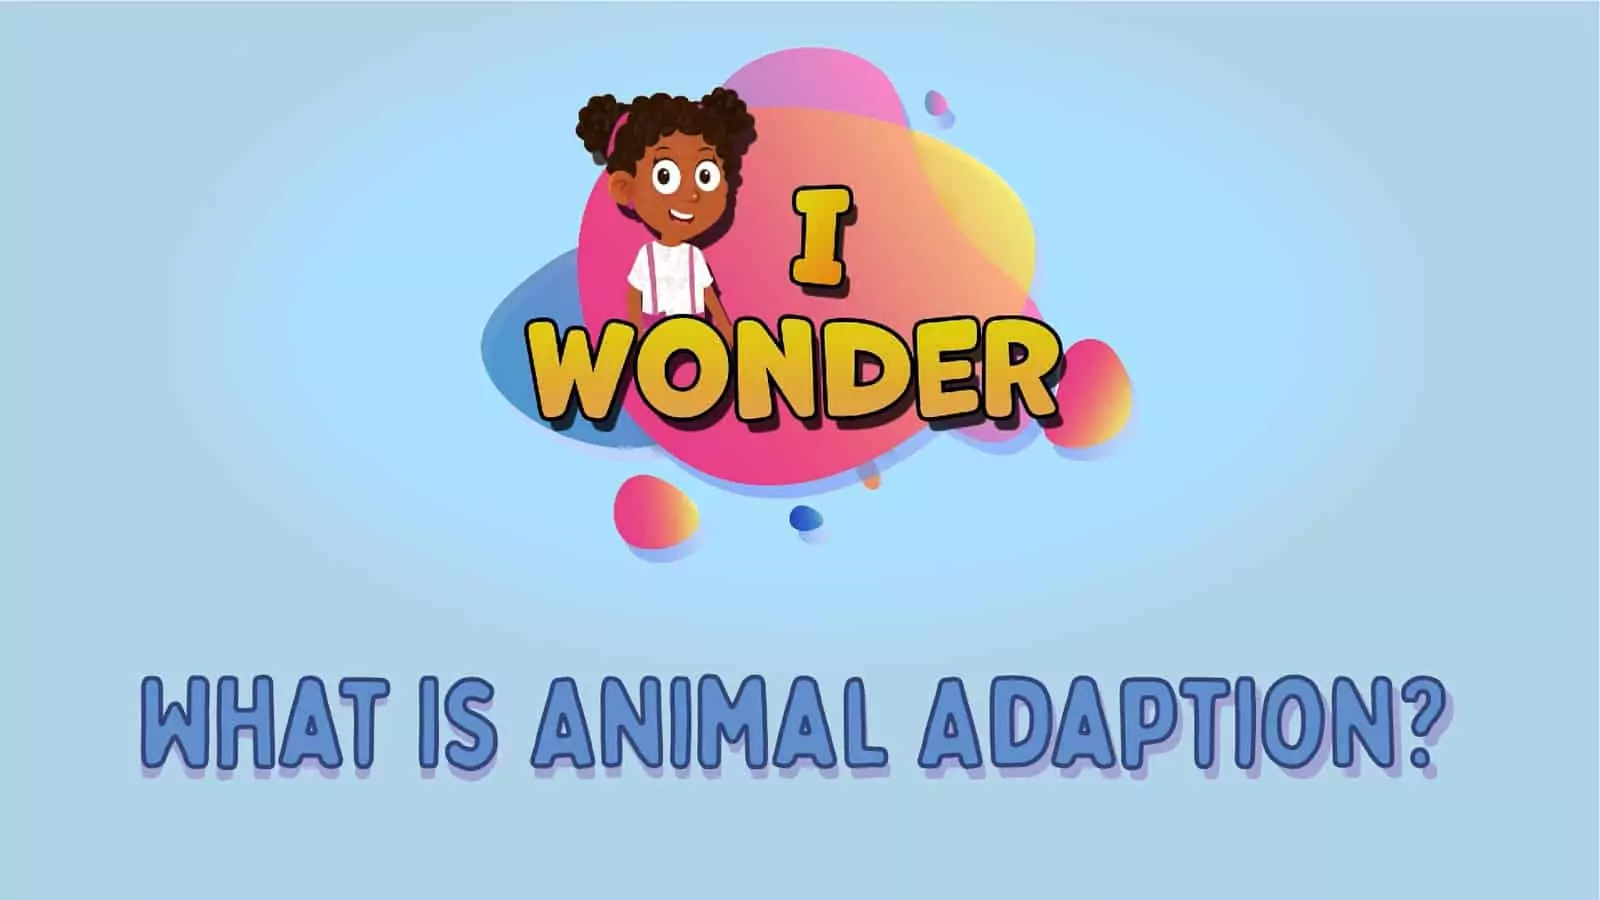 What Is Animal Adaptation?